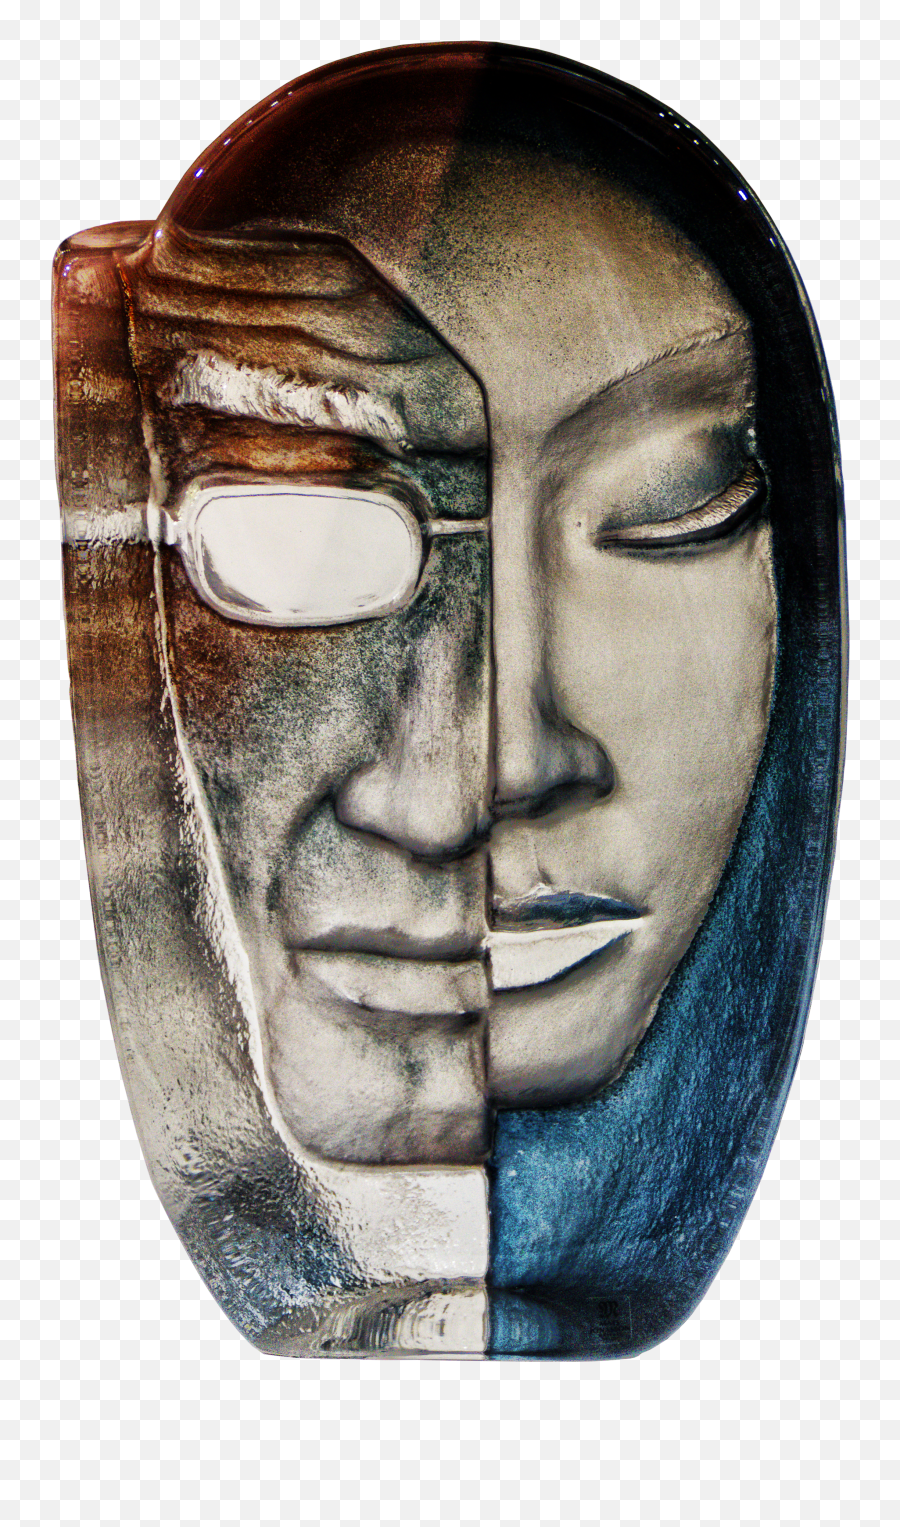 Glass Body Face Art Drawing Free Image Emoji,Drawing Emotions With The Body